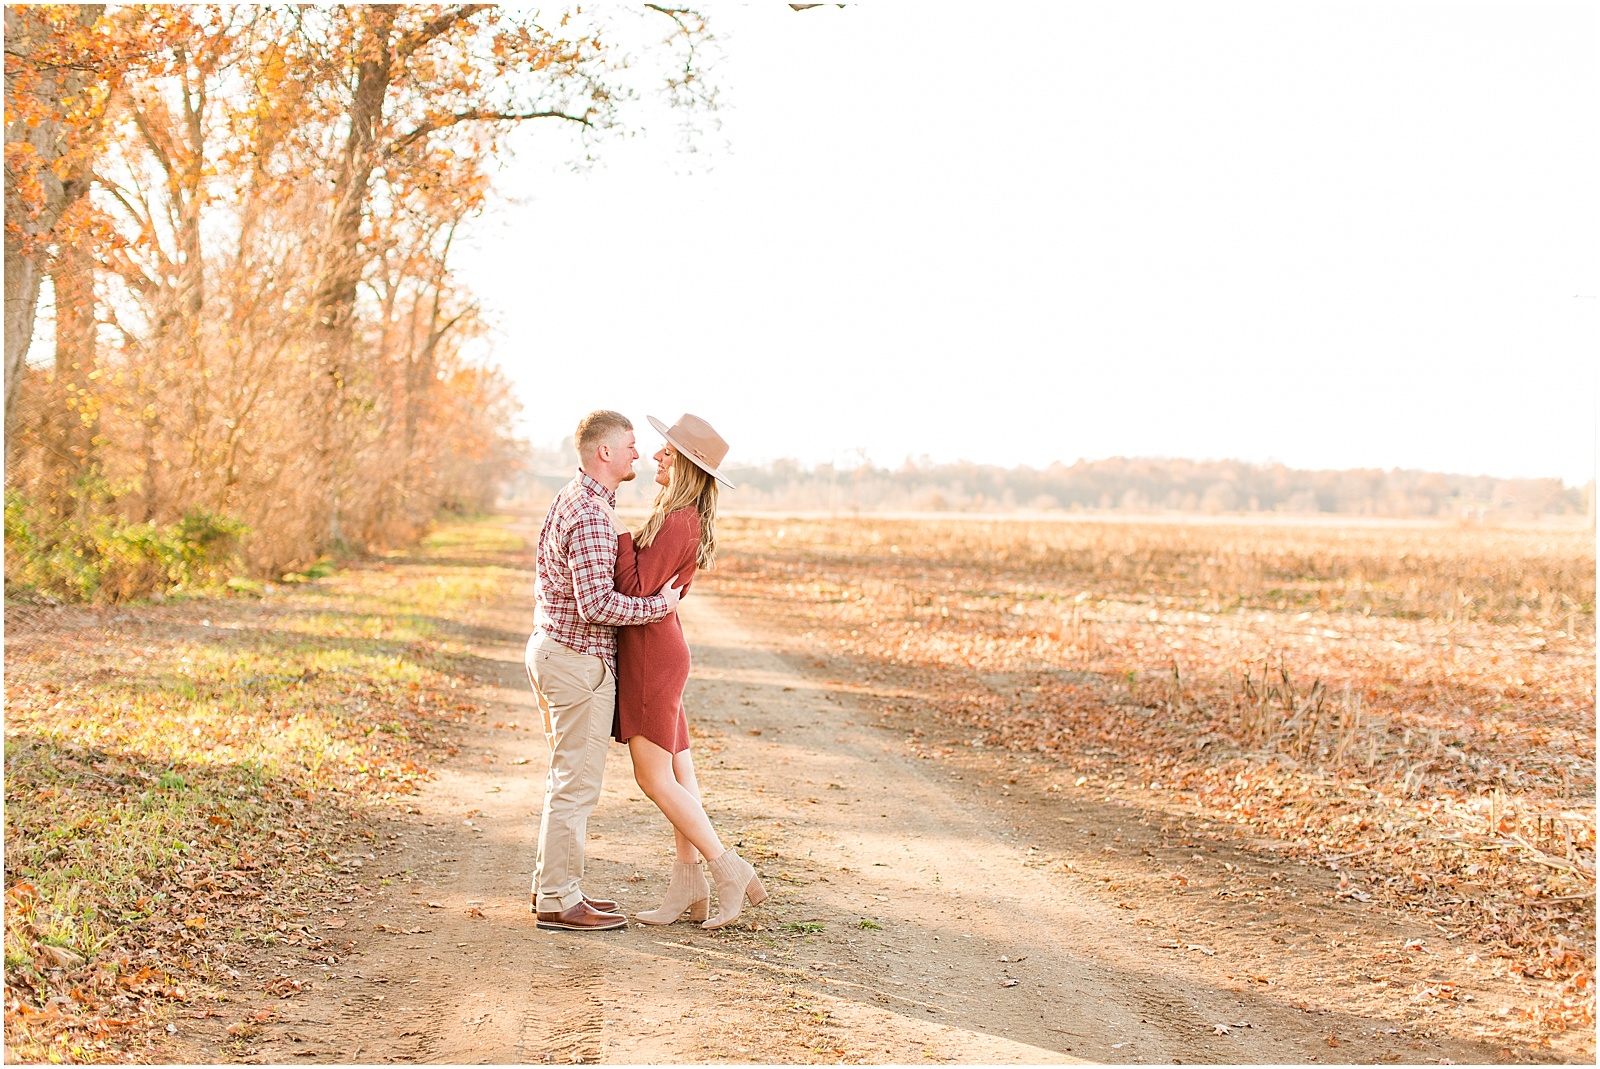 A Fall Southern Indiana Engagement Seesion | Cody and Hannah | Bret and Brandie Photography 021.jpg